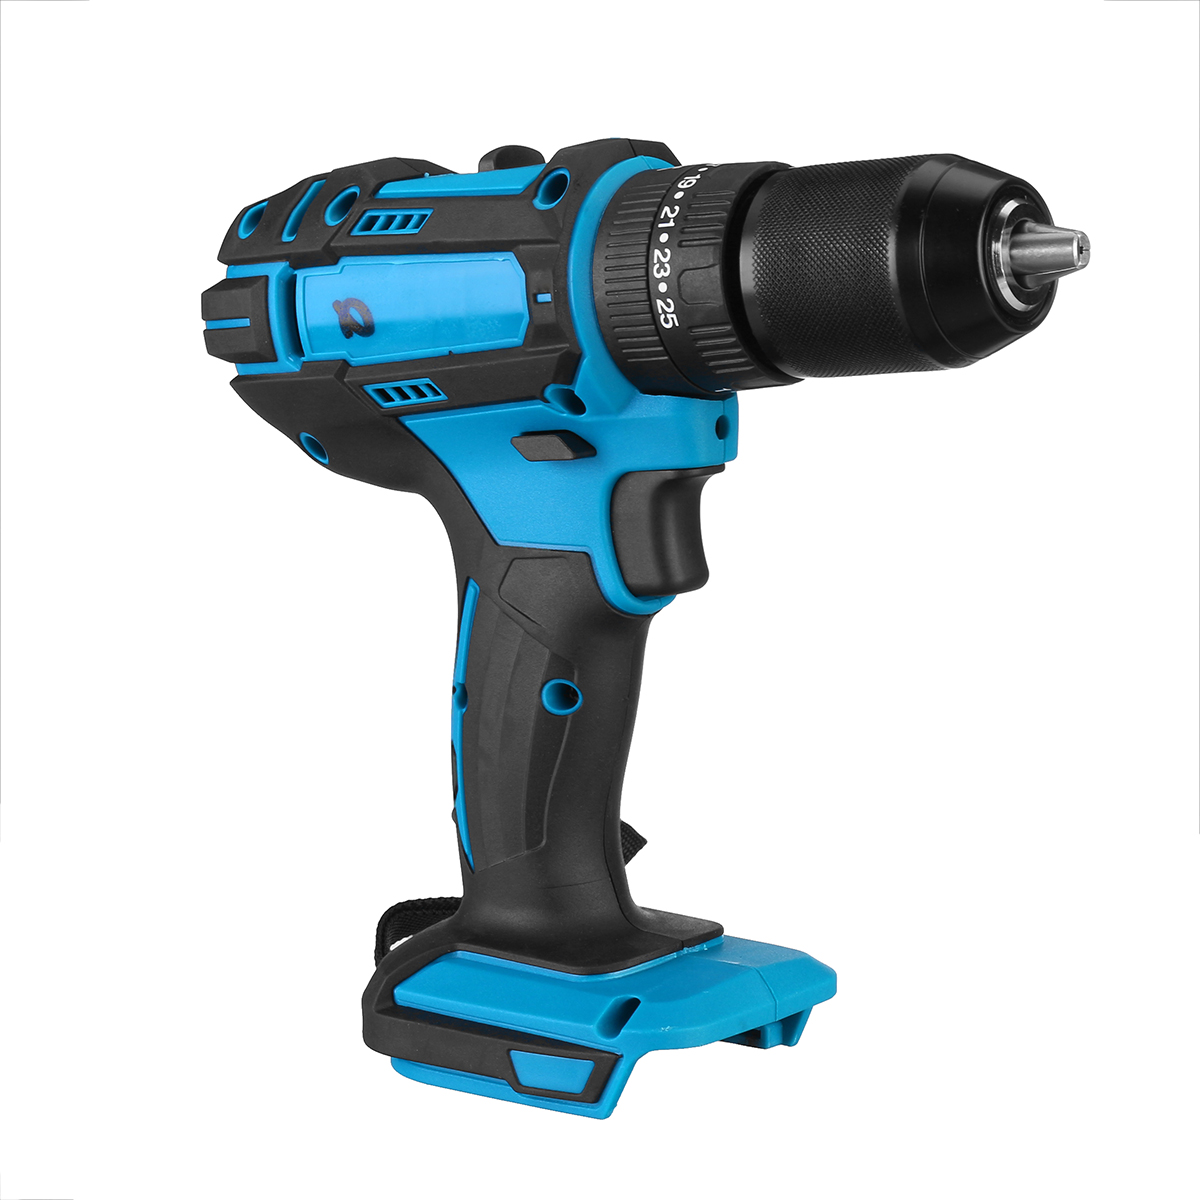 18V-Cordless-Electric-Drill-Driver-Impact-Torque-For-MakitaPower-Tool-1695066-3